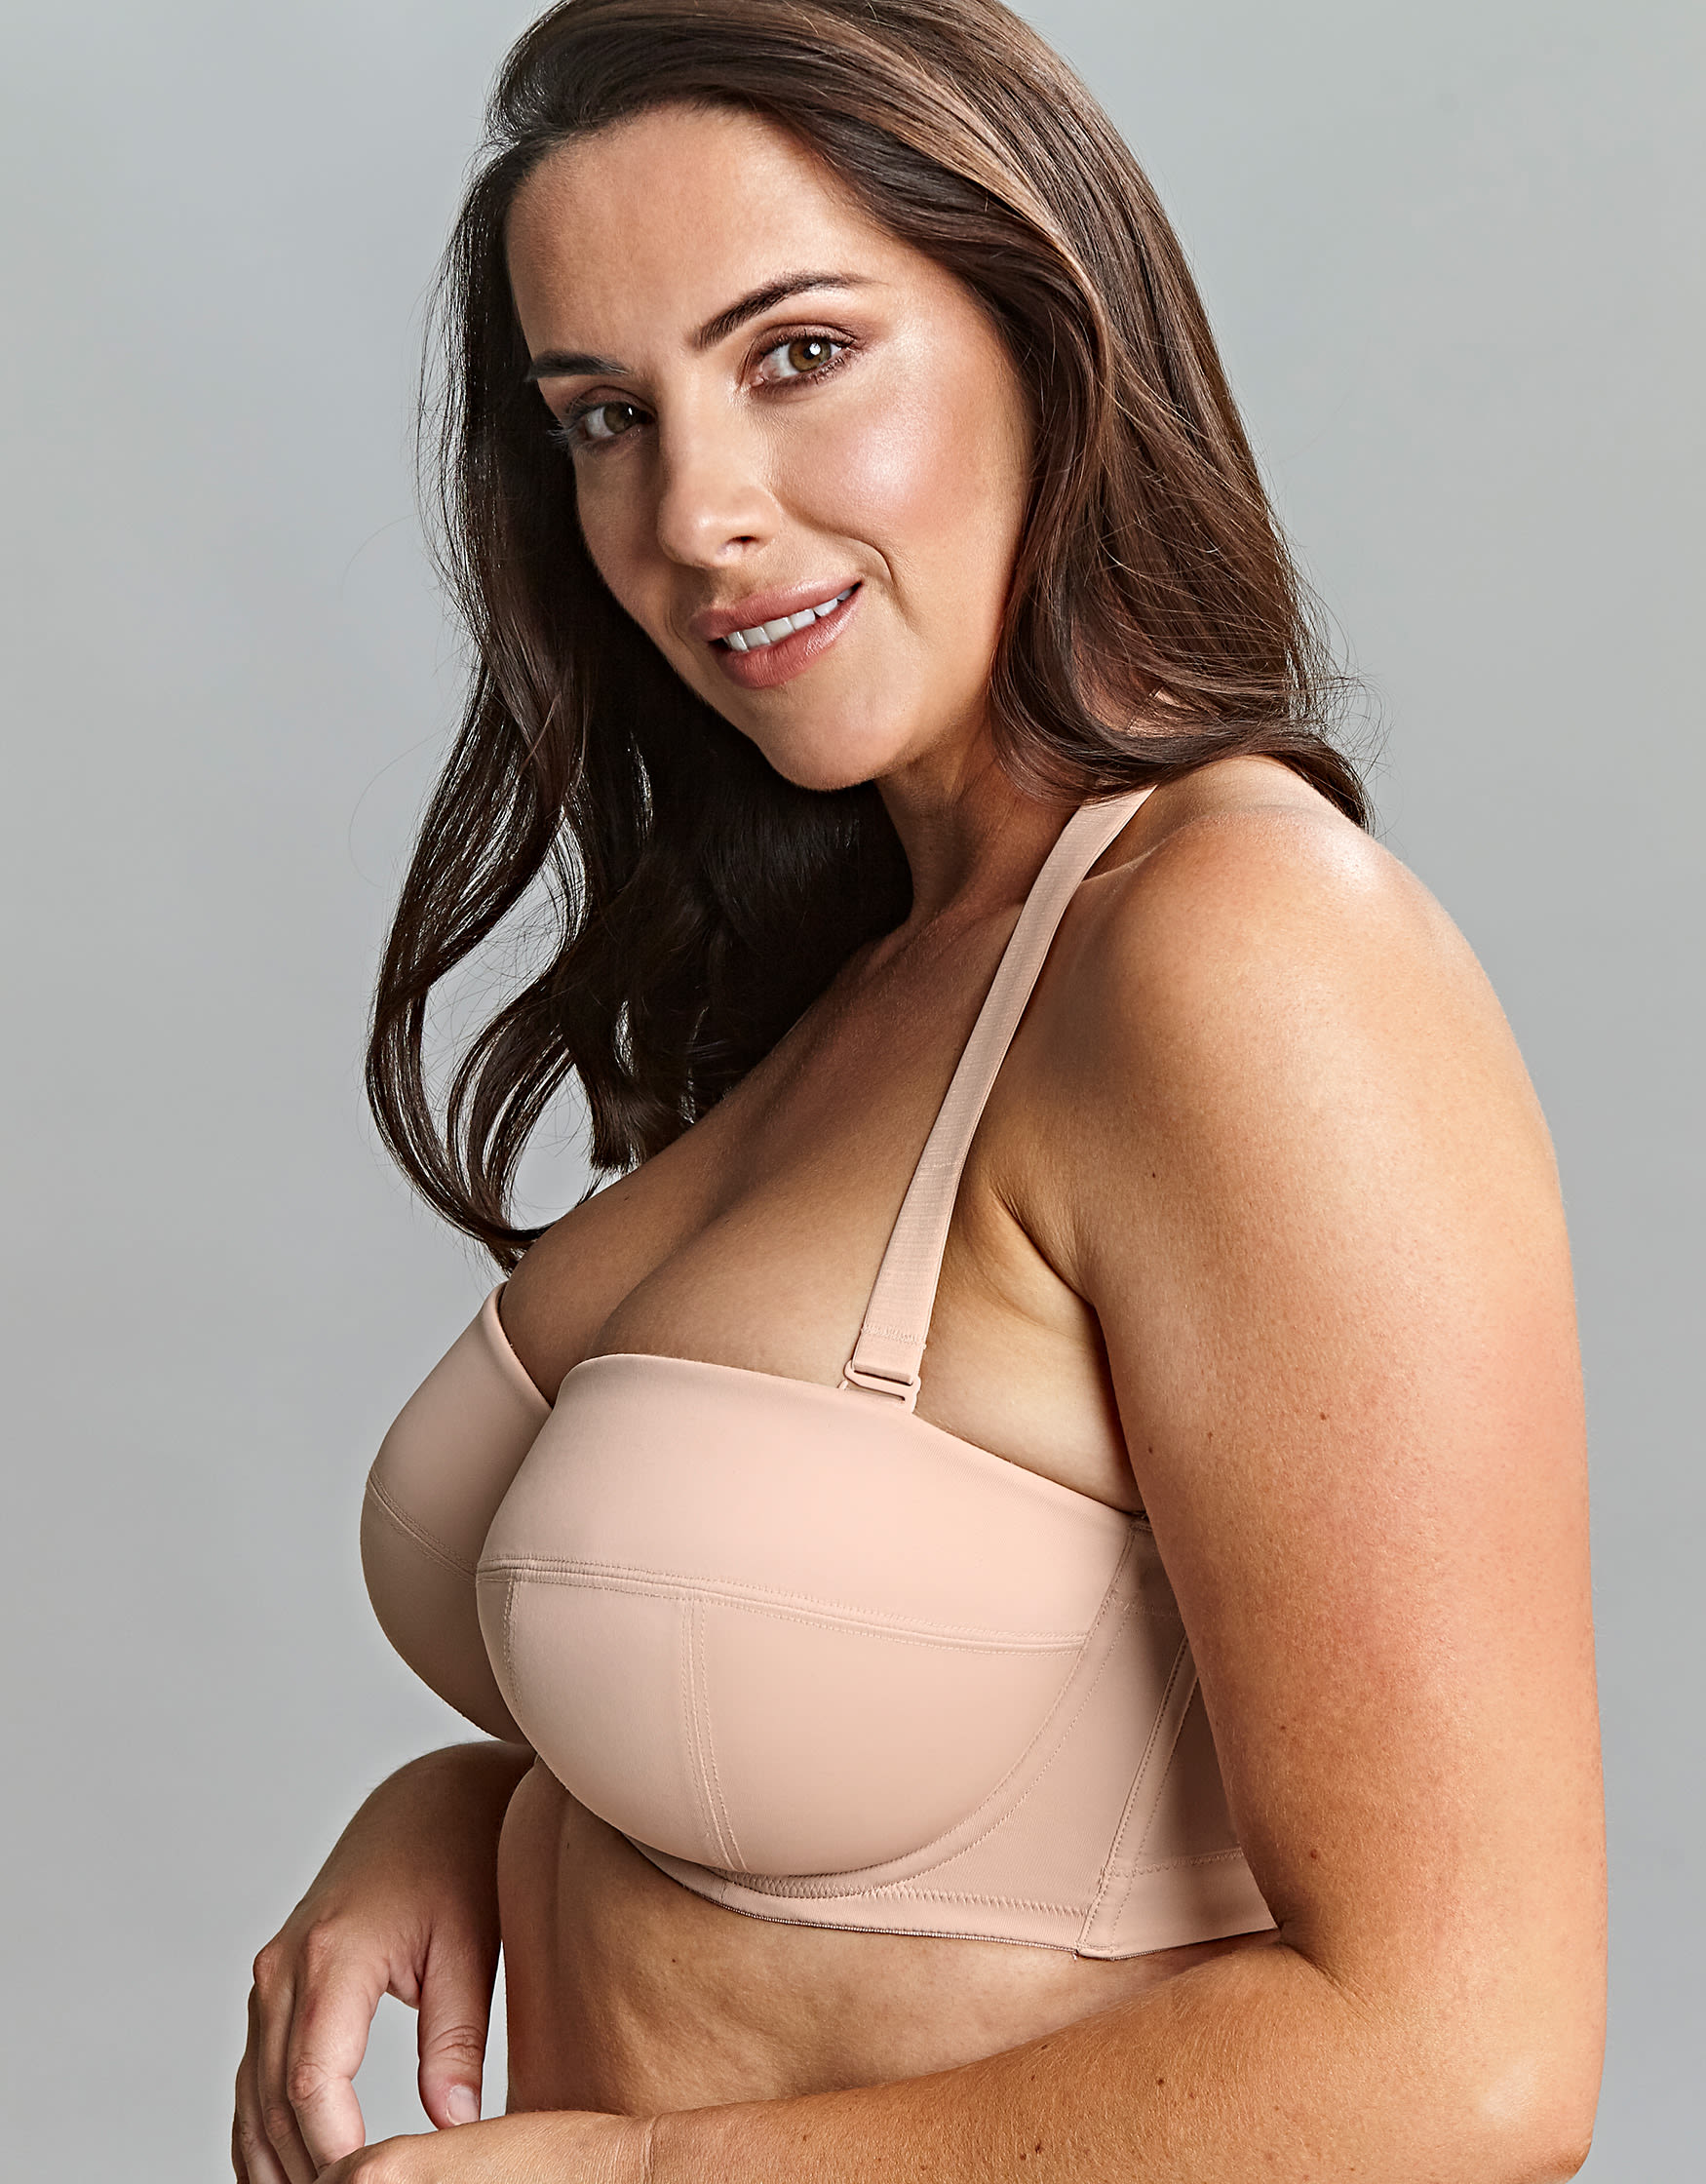 BOBbie Award: Sculptresse Dana Strapless, It's nearly impossible to find a  great strapless bra, especially if you're a little more blessed in the  chest than the average woman. This week's